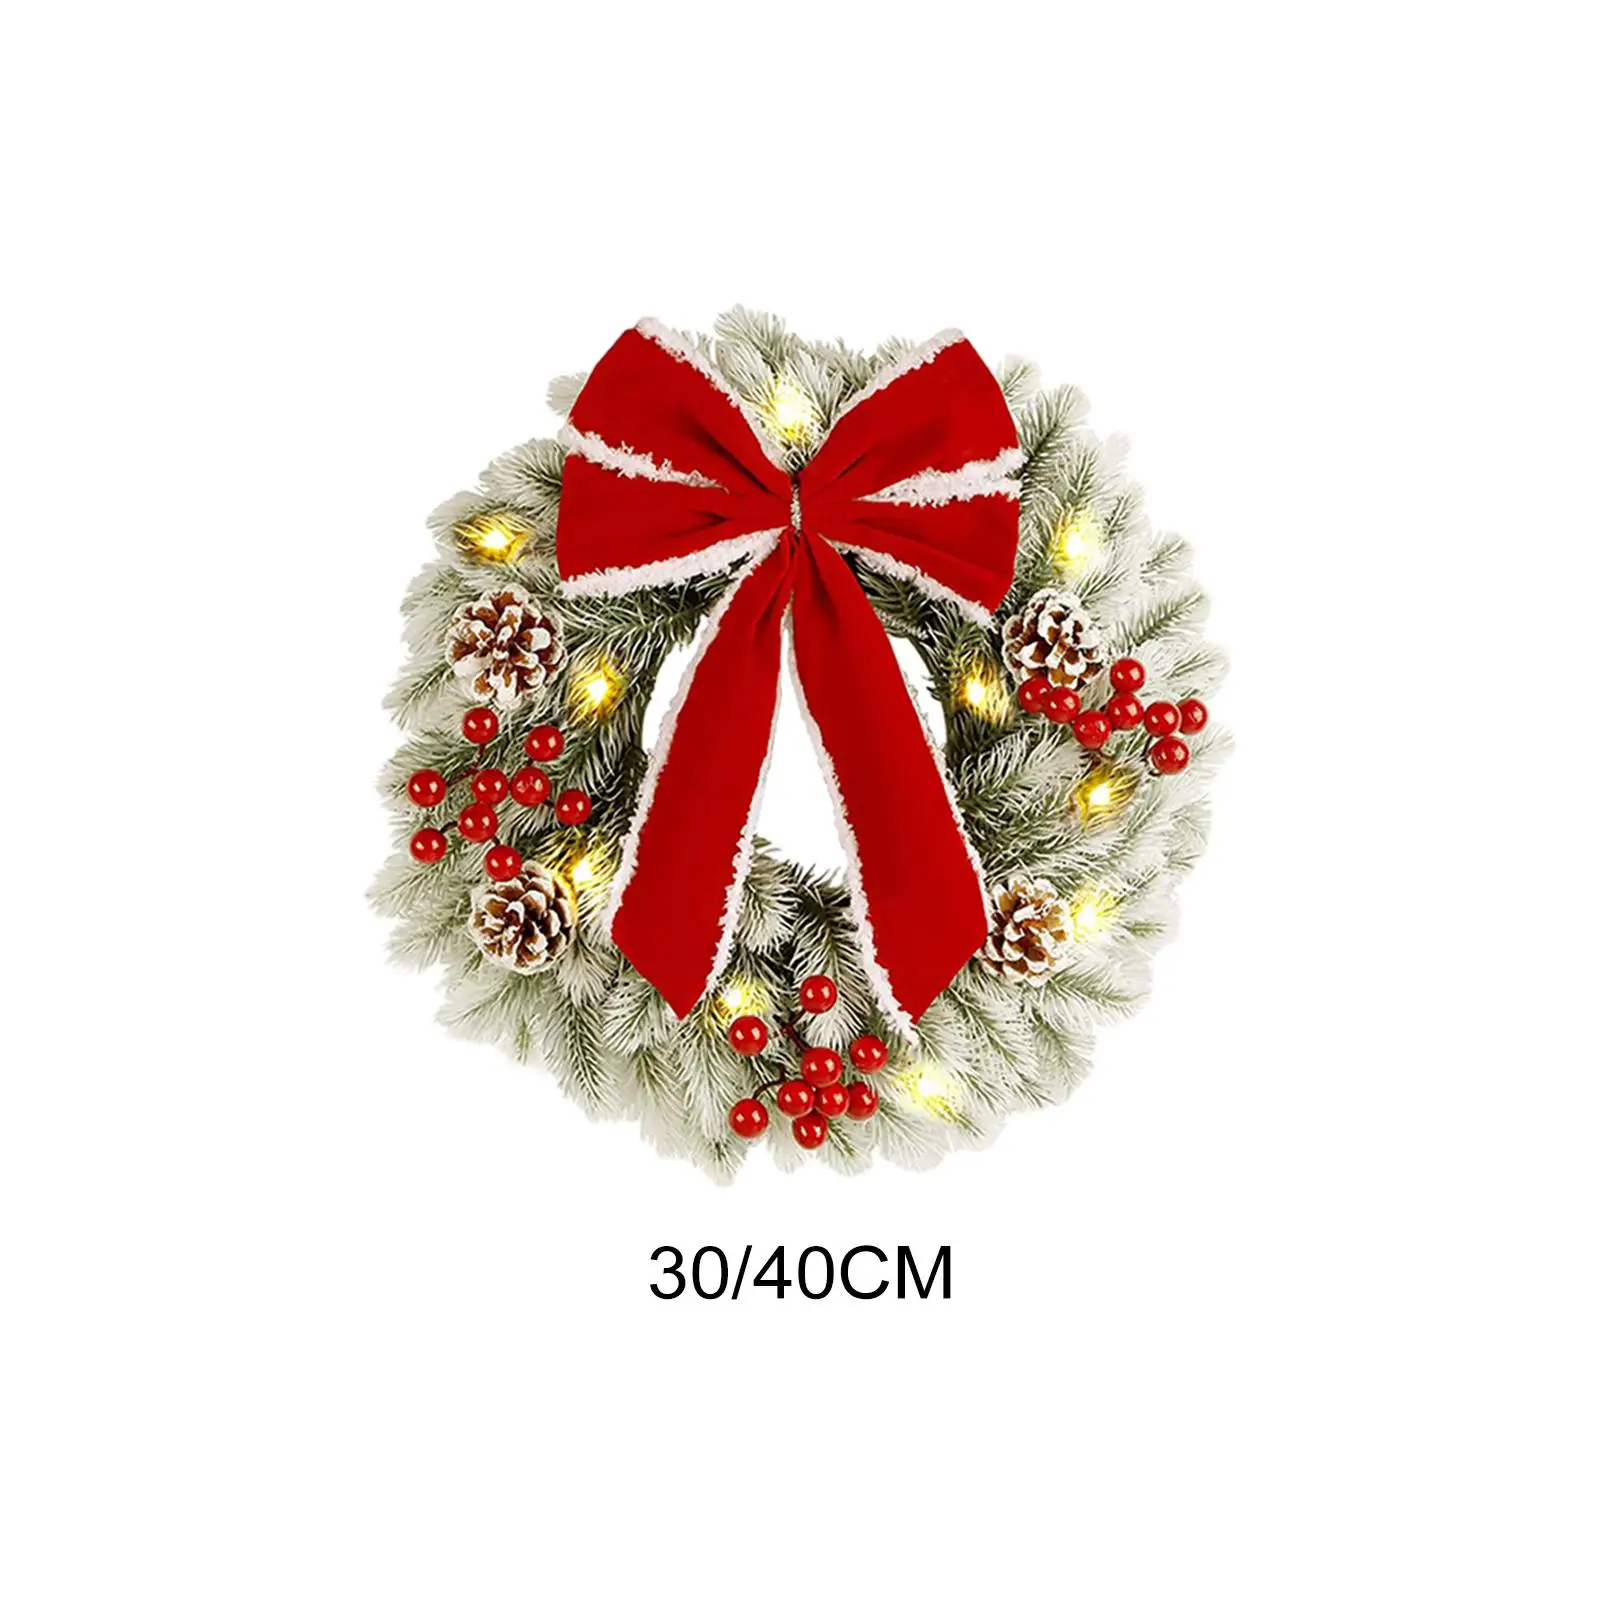 Christmas Wreath with Light Party Festival Door Ornaments Xmas Wreath Holiday Garland for Home Indoor Outdoor Wall Party Decor